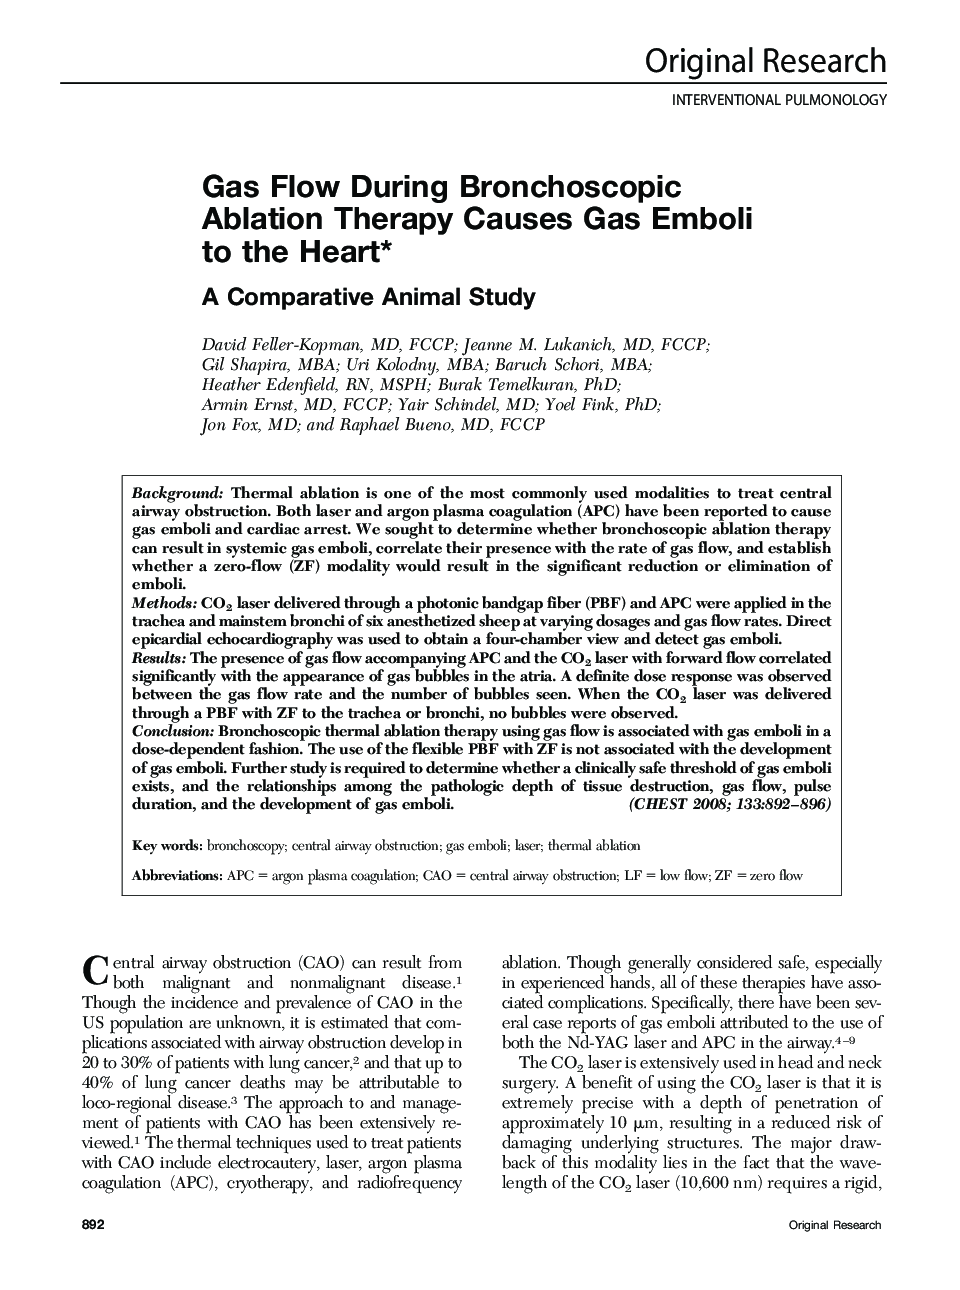 Gas Flow During Bronchoscopic Ablation Therapy Causes Gas Emboli to the Heart : A Comparative Animal Study